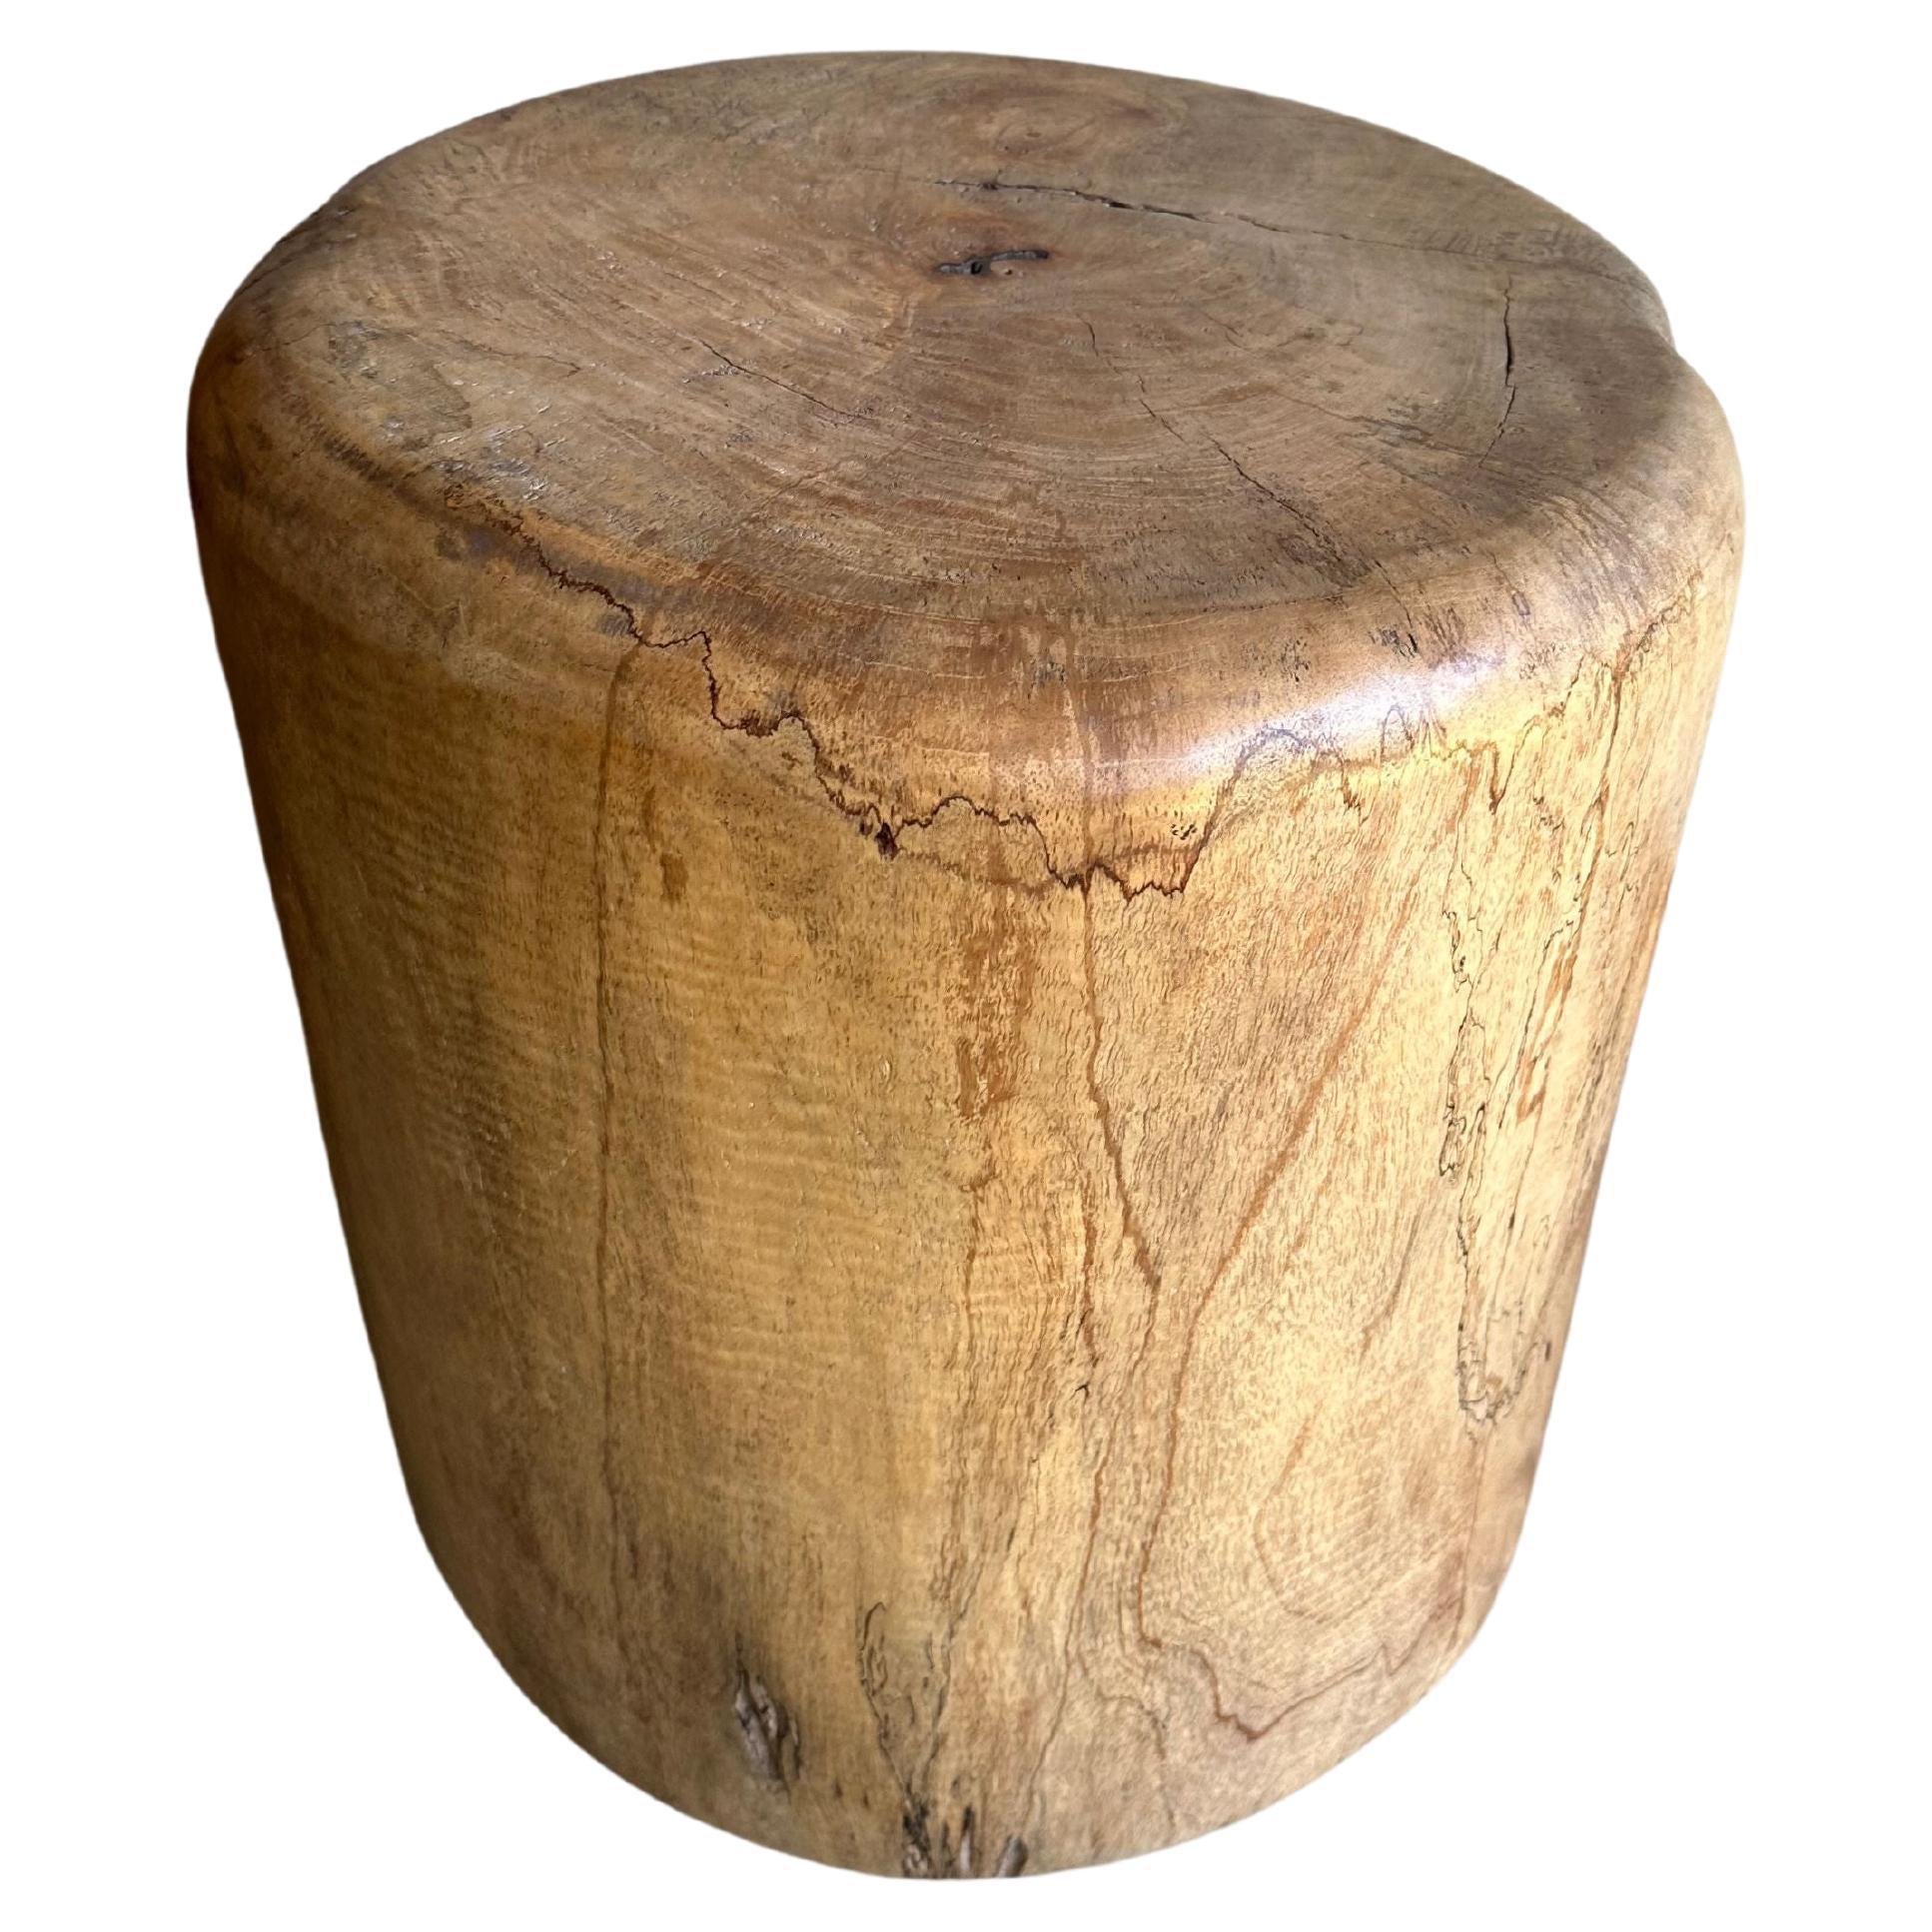 Sculptural Meranti Wood Side Table, with Stunning Wood Textures, Modern Organic